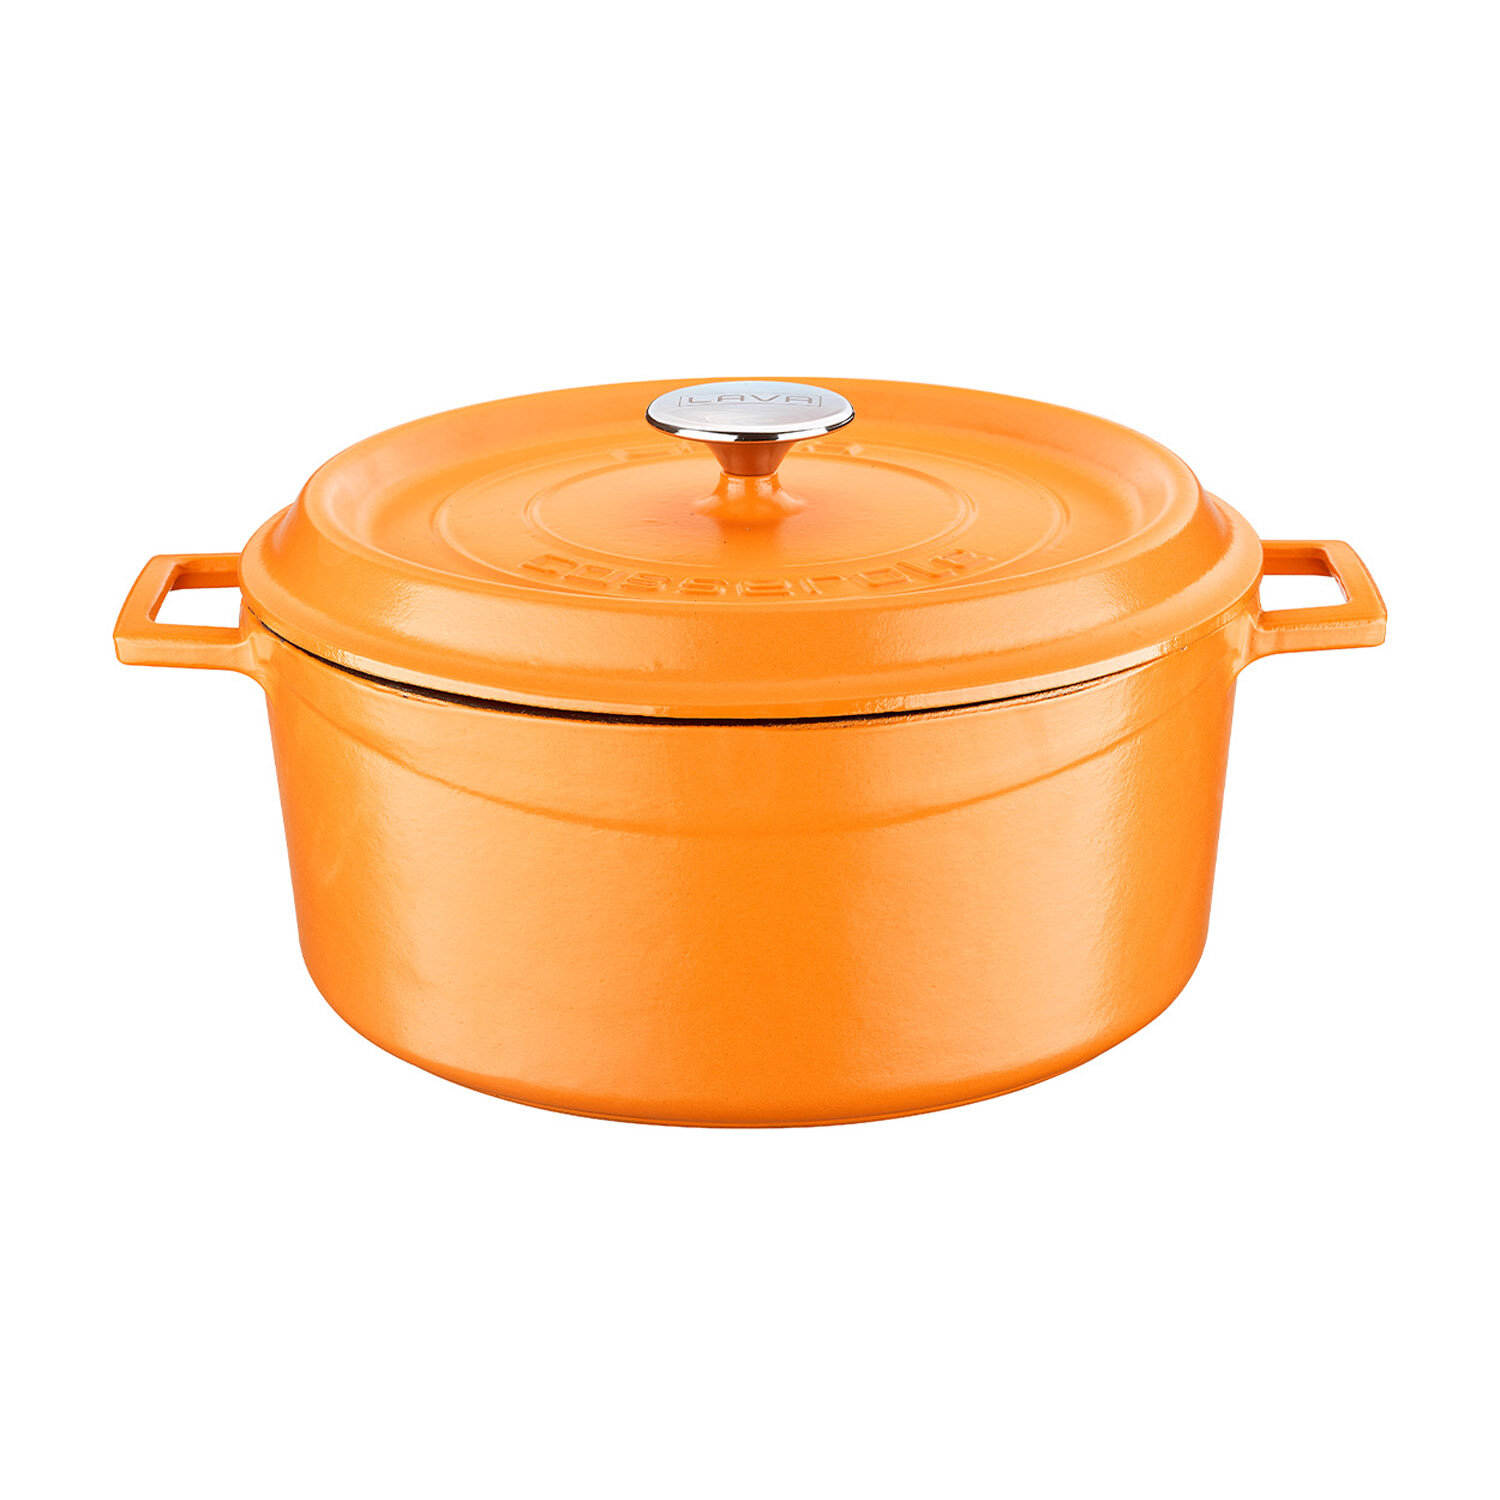 LAVA 7 Quarts Cast Iron Dutch Oven: Multipurpose Stylish Round Shape Dutch  Oven Pot with Glossy Sand-Colored Three Layers of Enamel Coated Interior